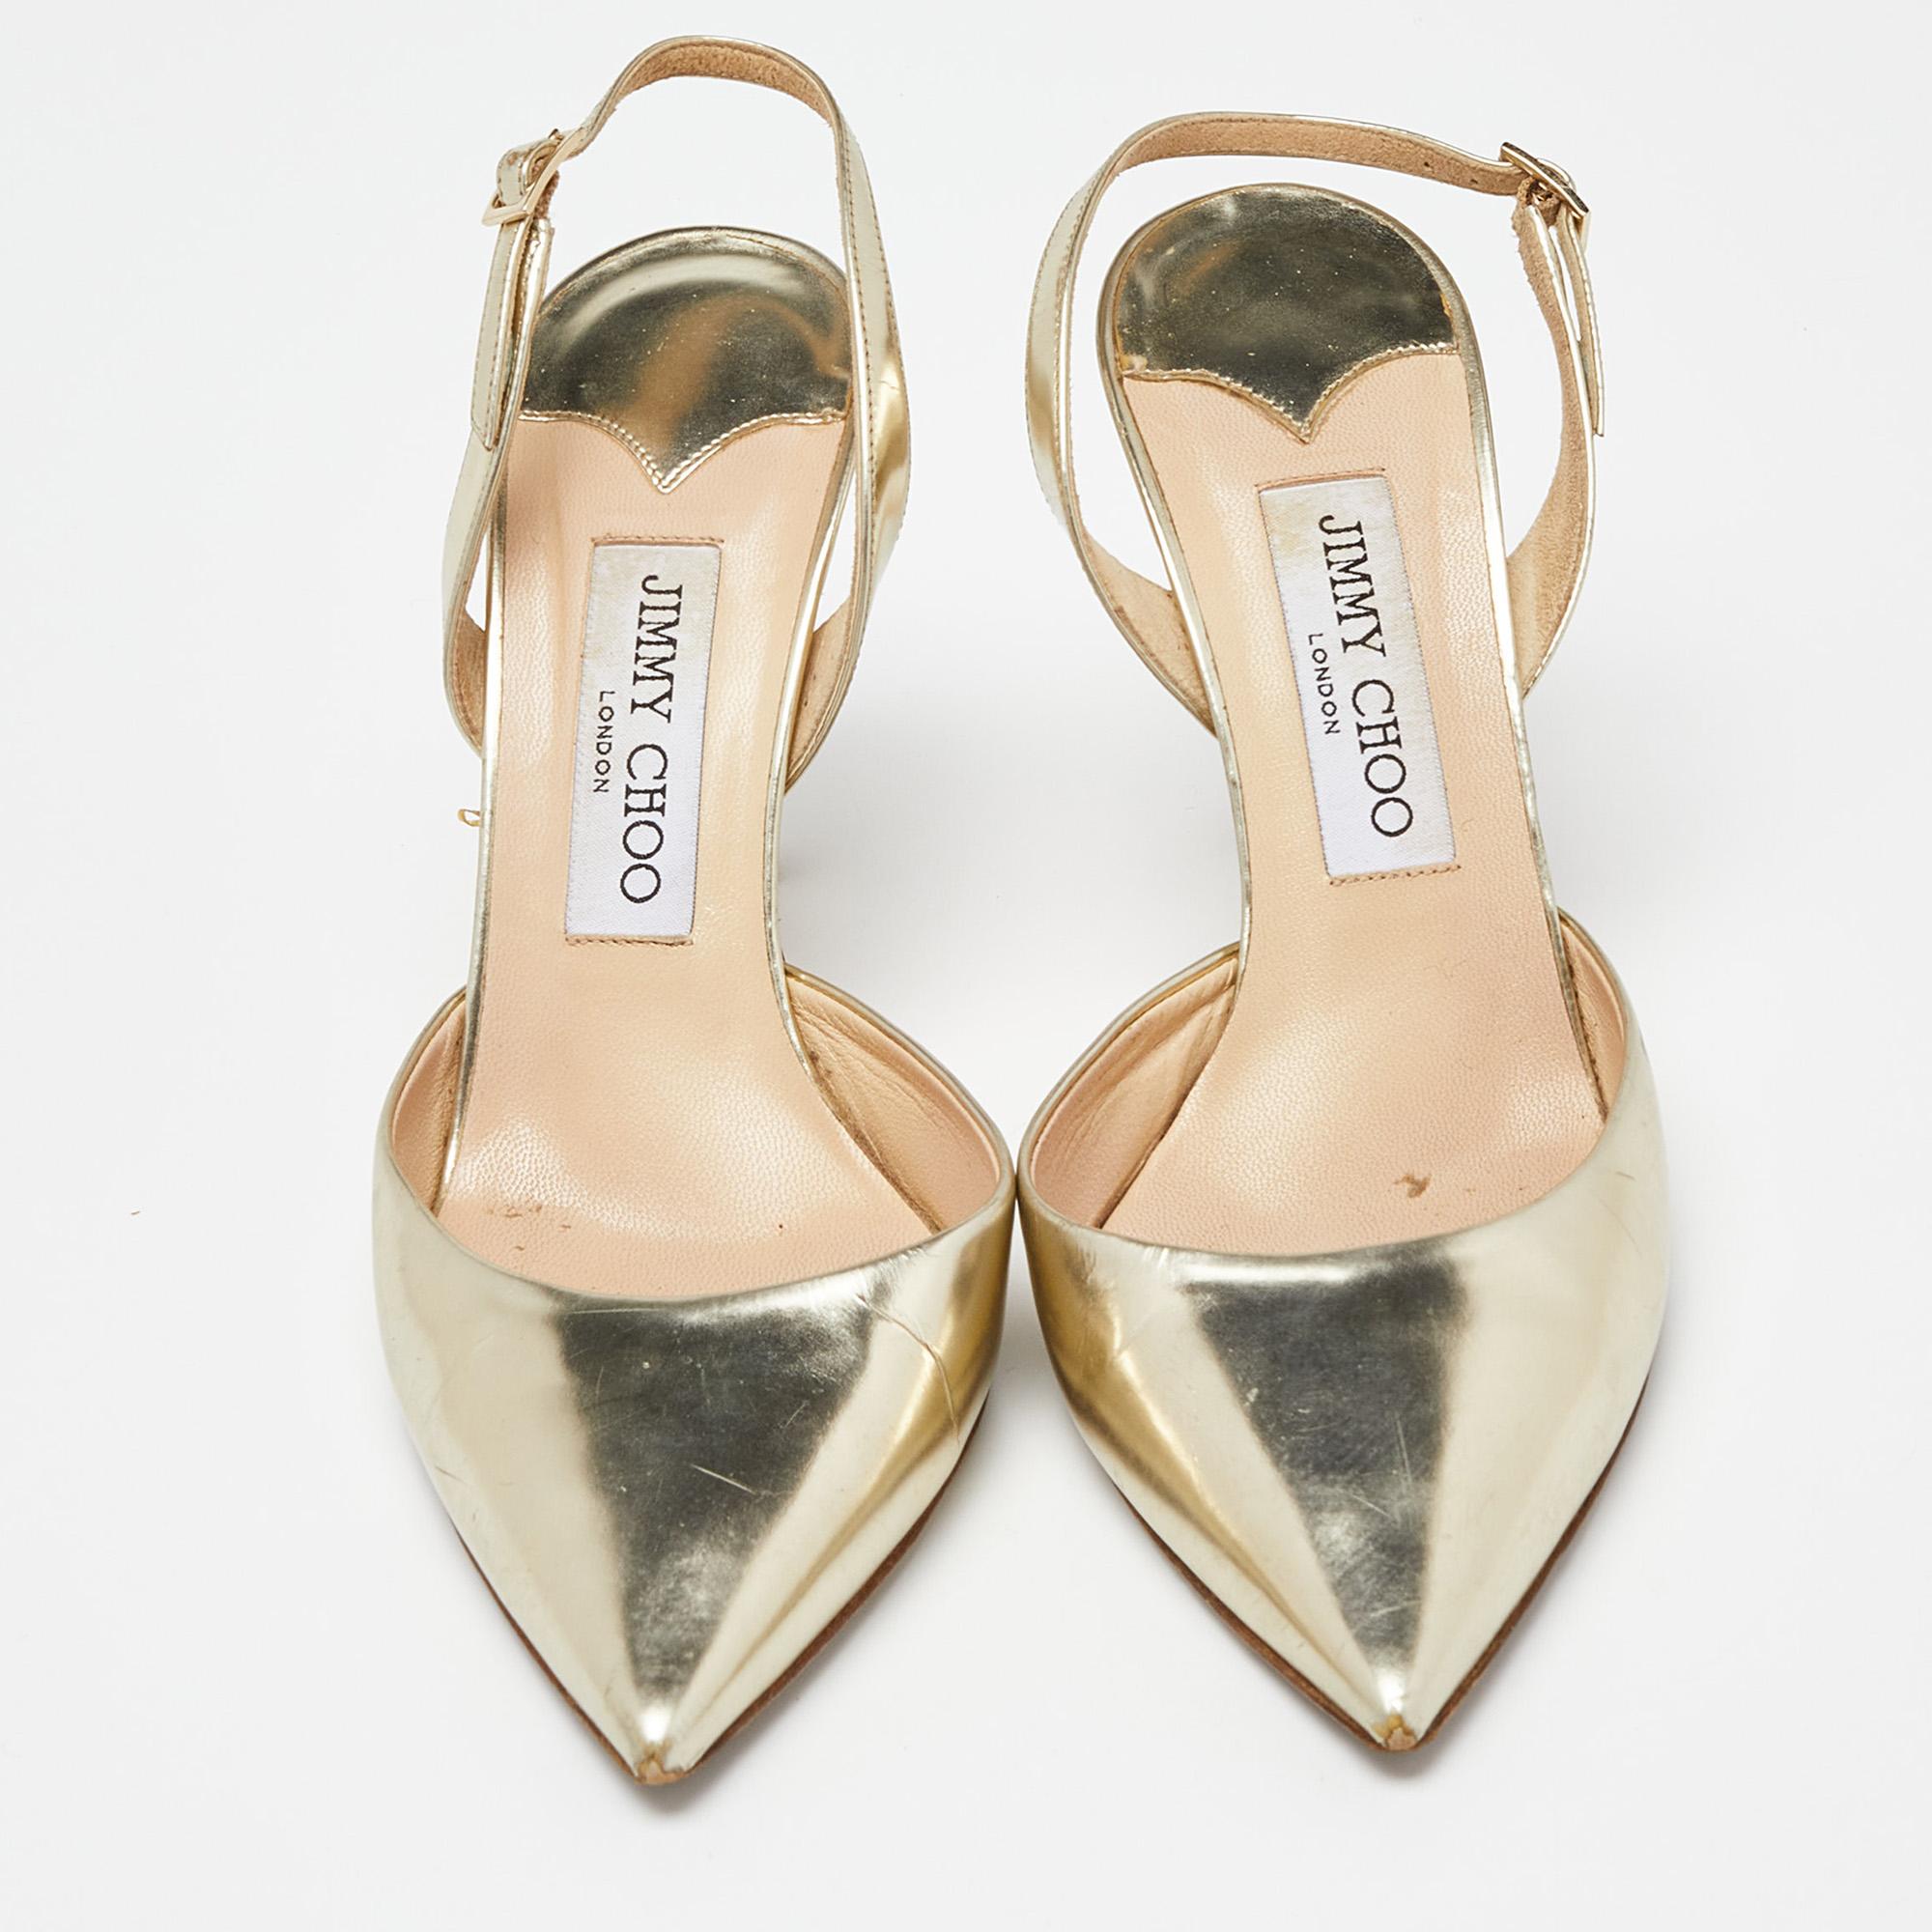 Treat your feet to these sandals from Jimmy Choo. The gold sandals are exquisitely crafted from leather and designed with slingbacks, pointed toes, and 10 cm heels.

